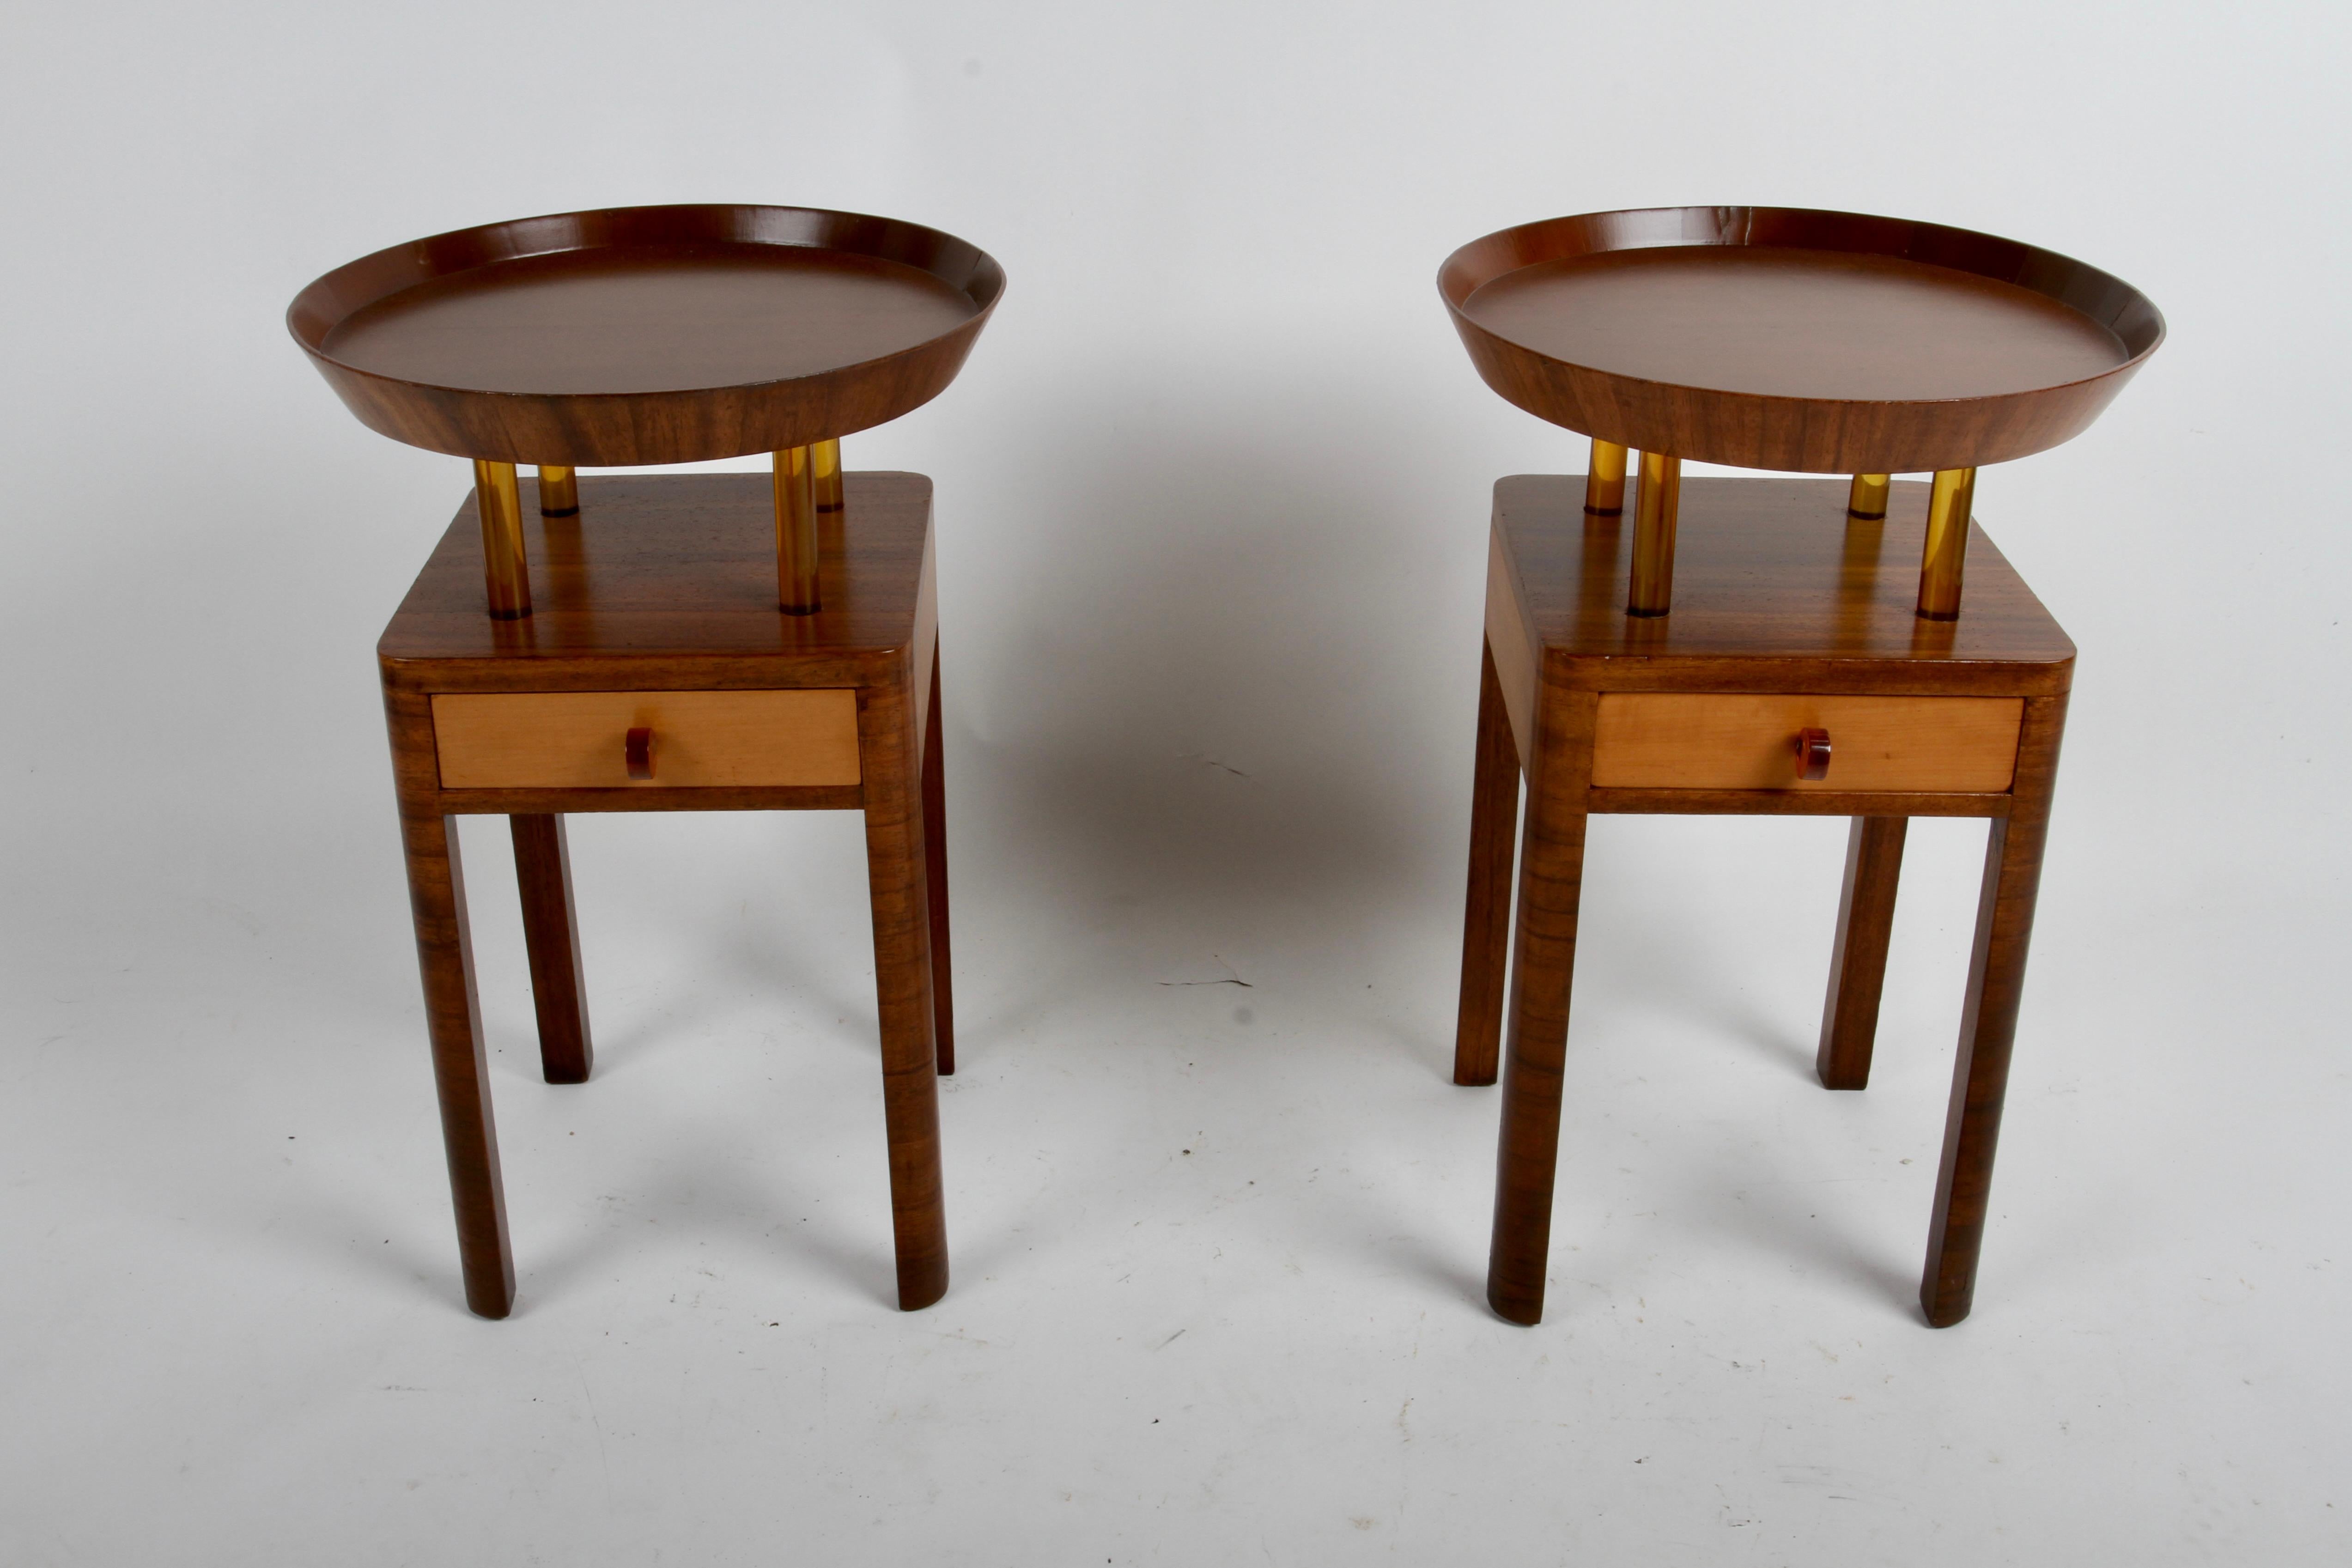 Rare Pair of 1940s Grosfeld House Round Tray Top End Table with Bakelite Details (Messing) im Angebot